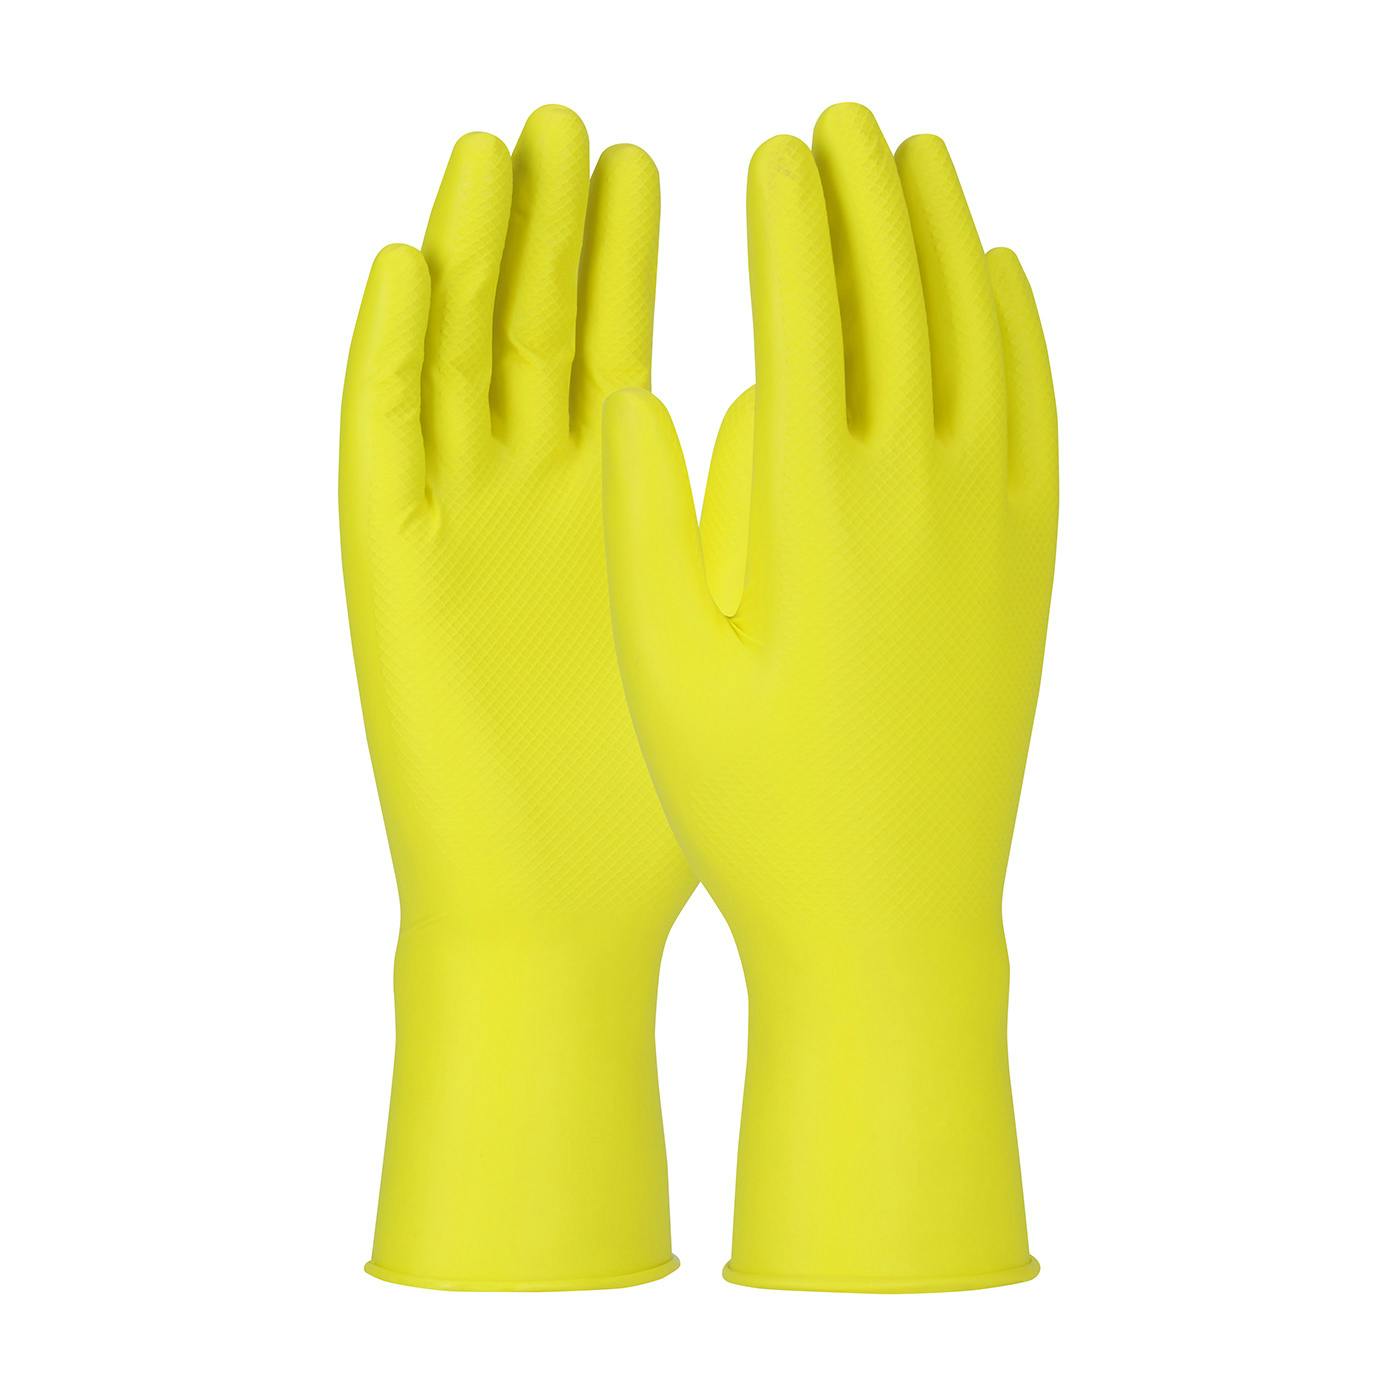 Grippaz™ Jan San Extended Use Ambidextrous Nitrile Glove with Textured Fish Scale Grip - 6 Mil (67-306)